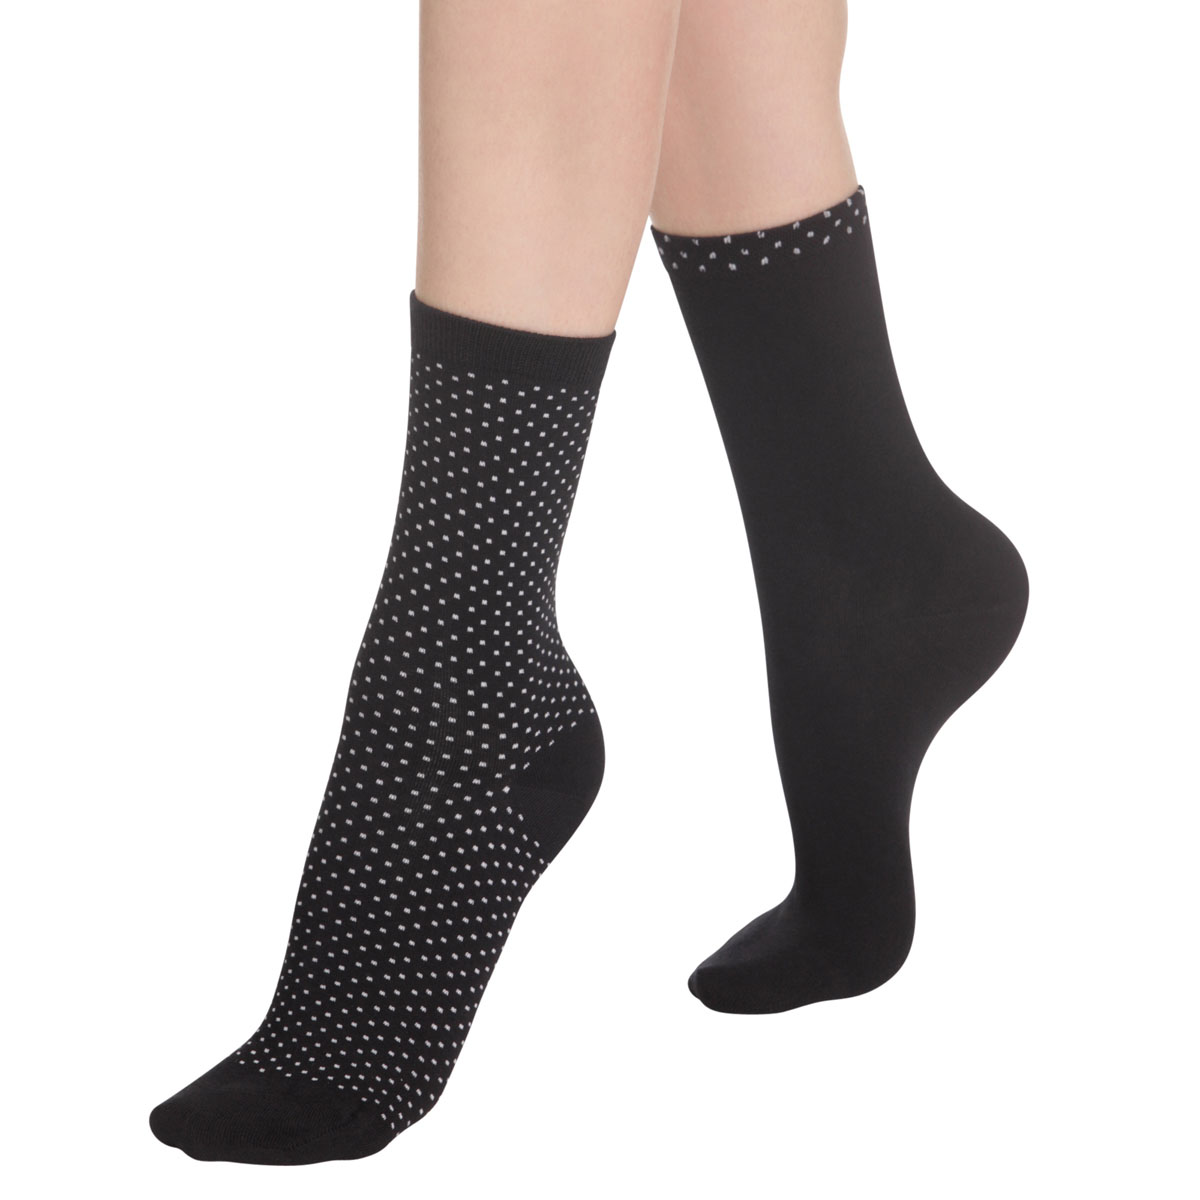 Pack of 2 pairs of black dotted swiss socks for women